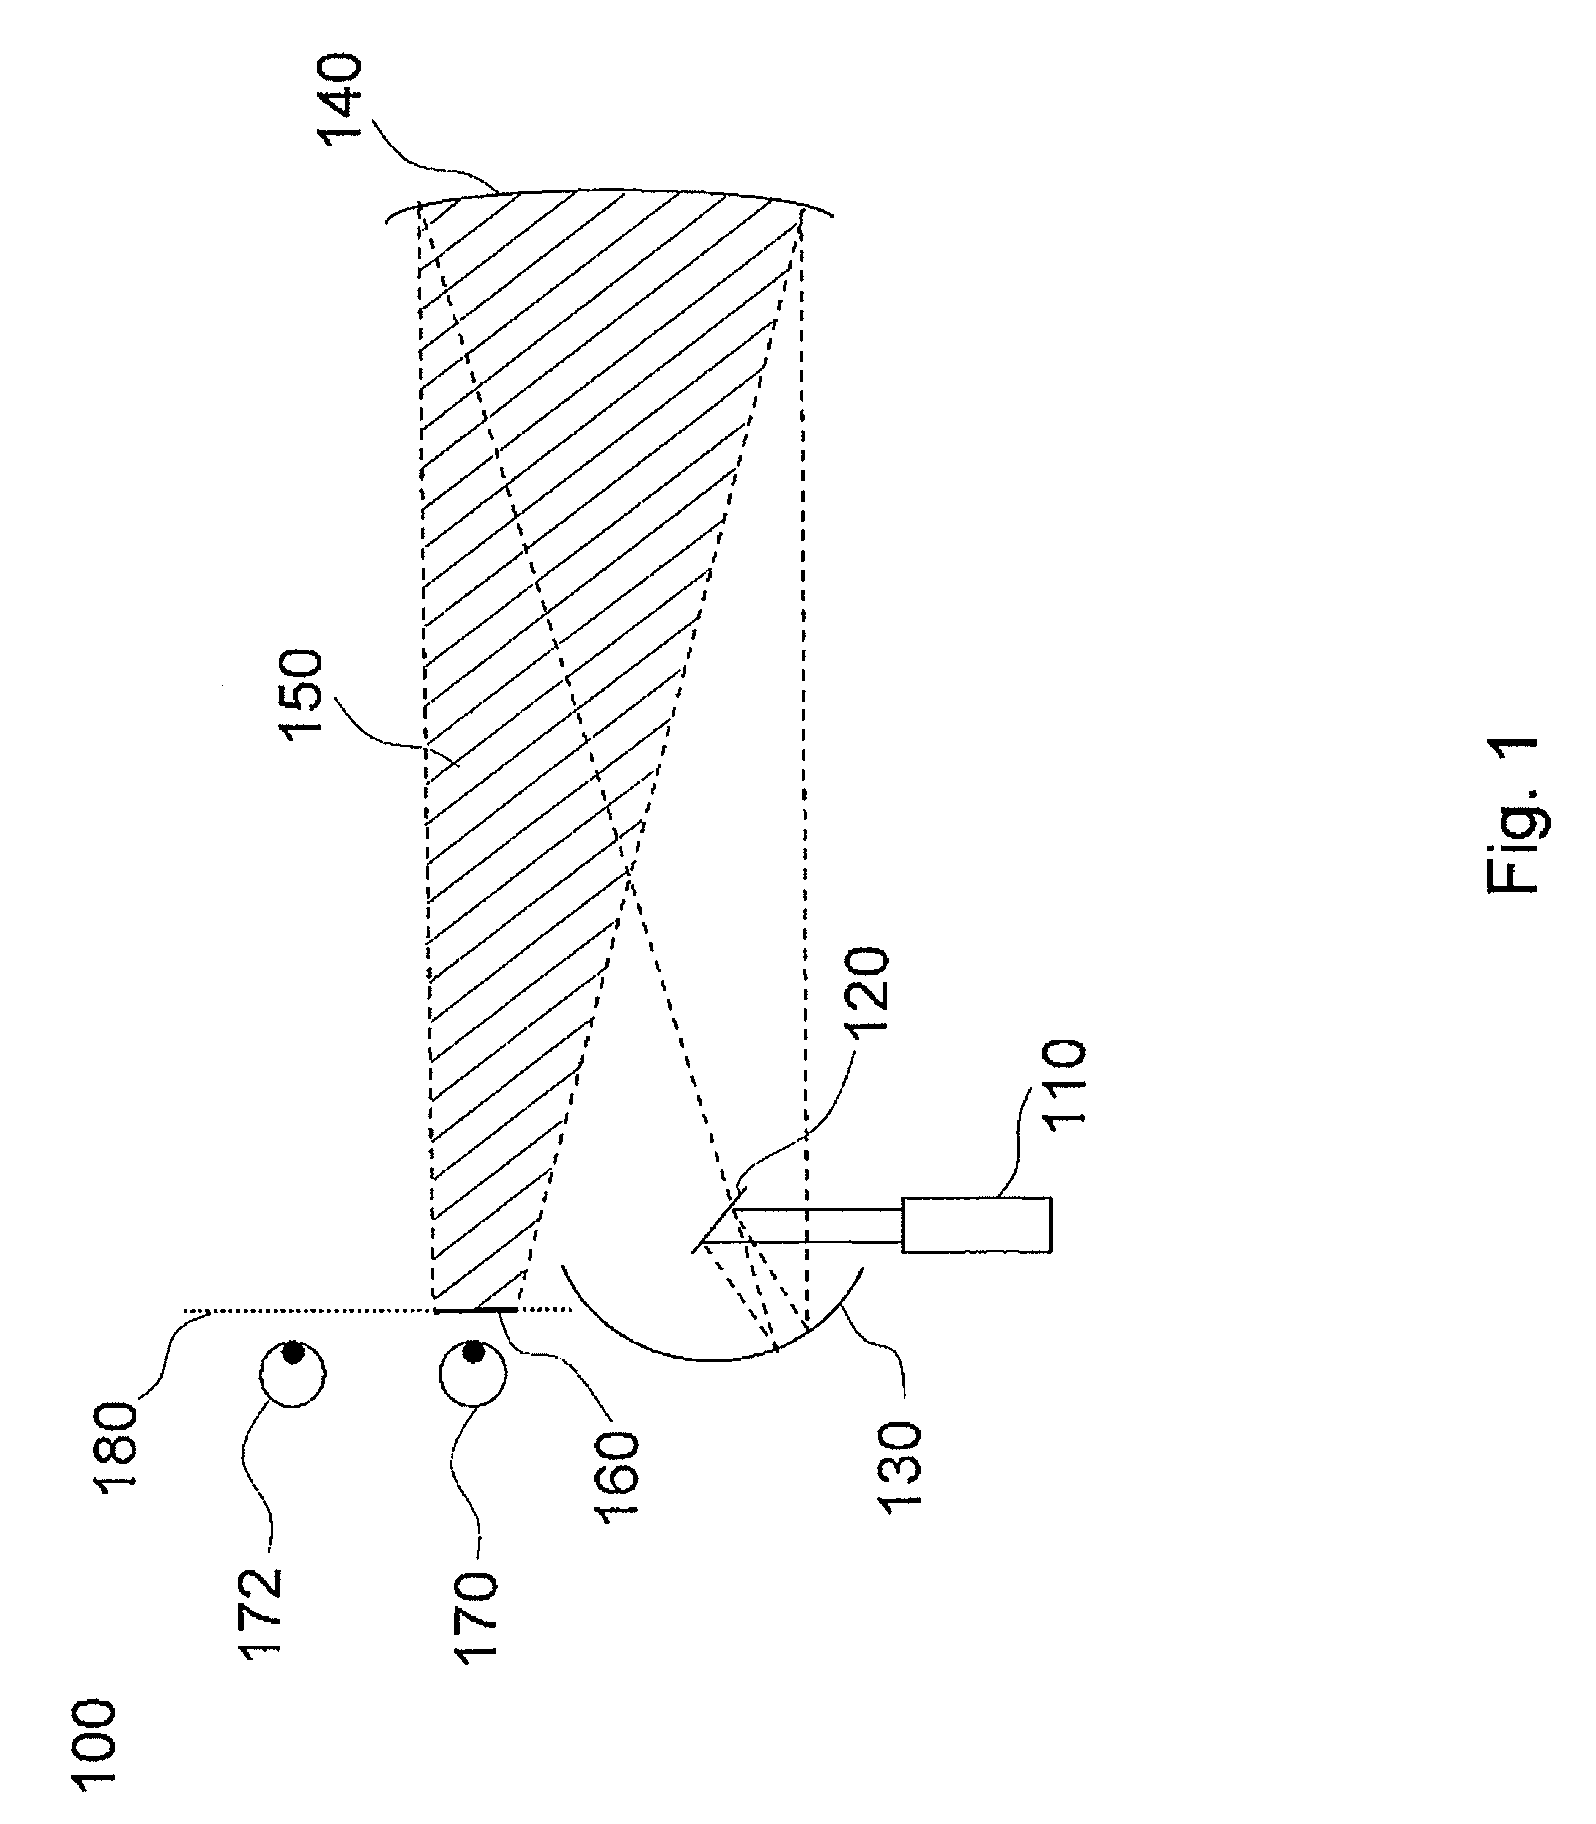 Holographic reconstruction system and method with a sequence of visibility regions